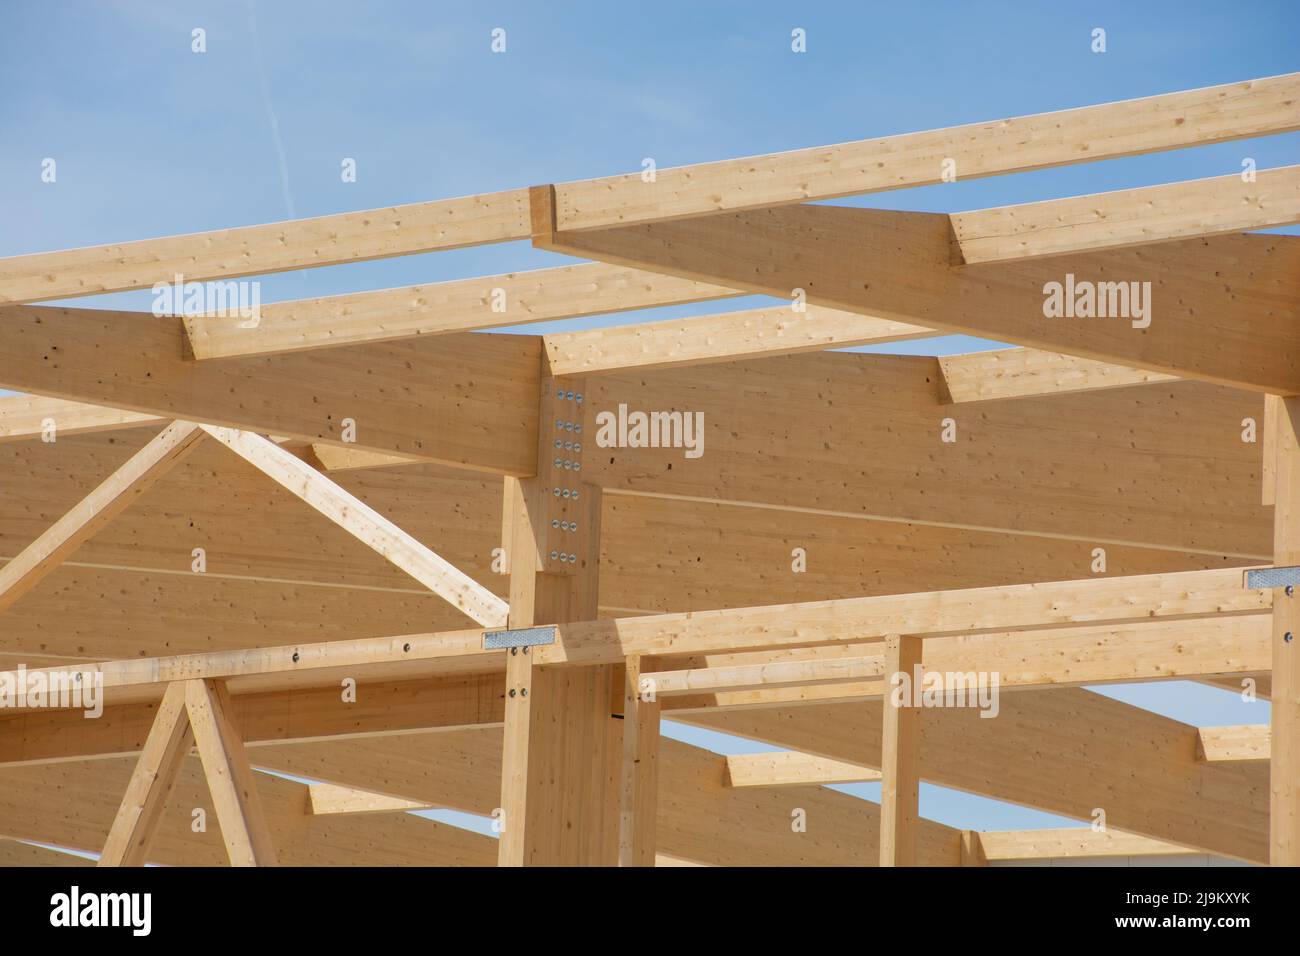 The construction of the wooden roof connected to the individual beams Stock Photo